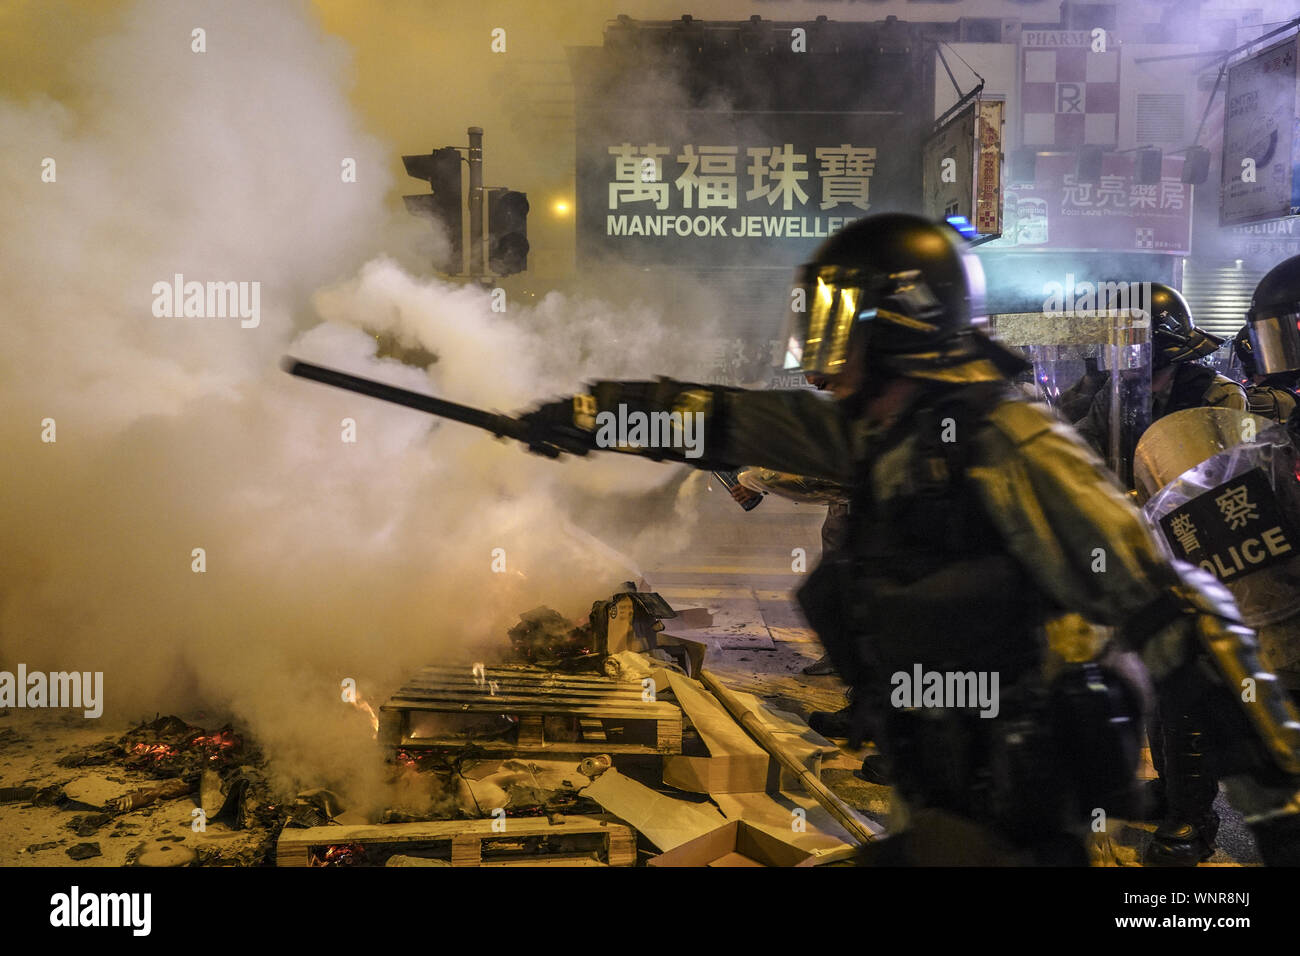 Kowloon, Hong Kong. 6th Sep, 2019. Riot Police officers advance to chase away protesters on Friday September 6, 2019 in Mong Kok Town Kowloon, Hong Kong.Thousands of protestors gathered outside of Mong Kok police station and around that area to protest the police violence against citizens of Hong Kong.Protesters Moved Nathan Rd to south, destroying surveillance cameras, street signs, building barricades with wooden panes and garbages then set on fire as they move on.9/6/2019.Kowloon, Hong Kong. Credit: ZUMA Press, Inc./Alamy Live News Stock Photo